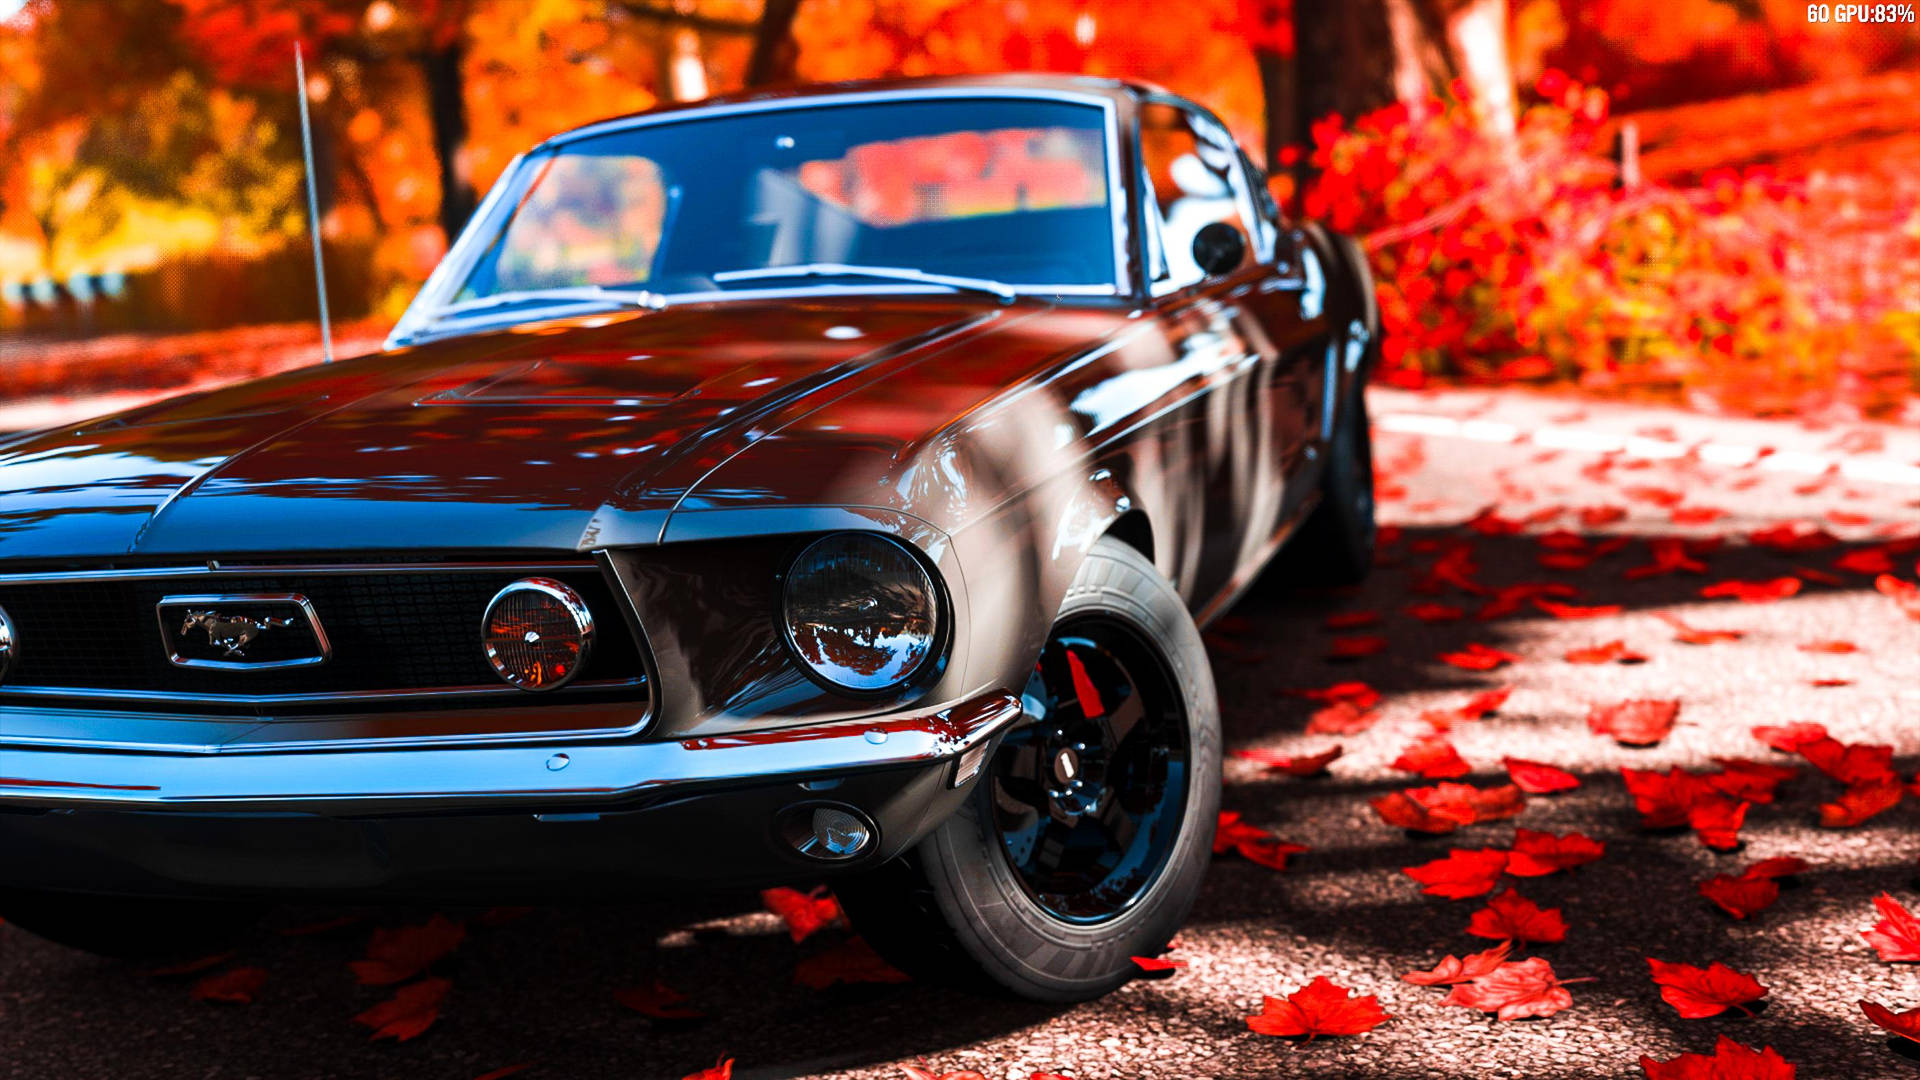 Wallpaper : 1920x1080 px, classic car, eleanor, Ford Mustang Shelby, gt500,  old car 1920x1080 - wallup - 673286 - HD Wallpapers - WallHere